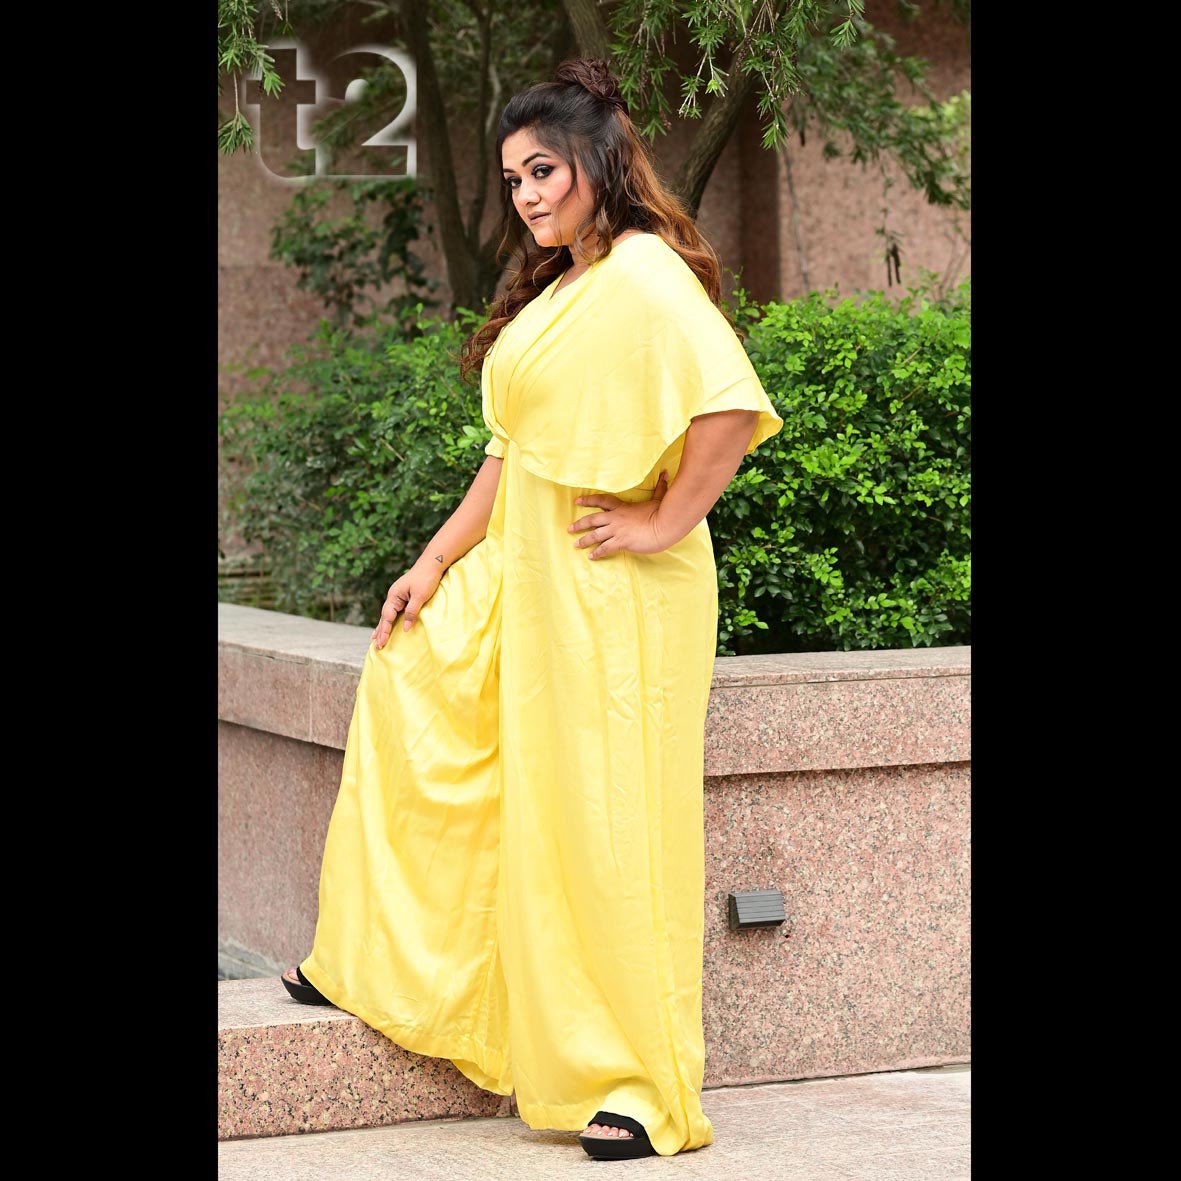 Koneenica Banerjee shows how to carry the monotone trend smartly with grace in this t2 Puja shoot t2online.in/goodlife/fashi… @koneenica